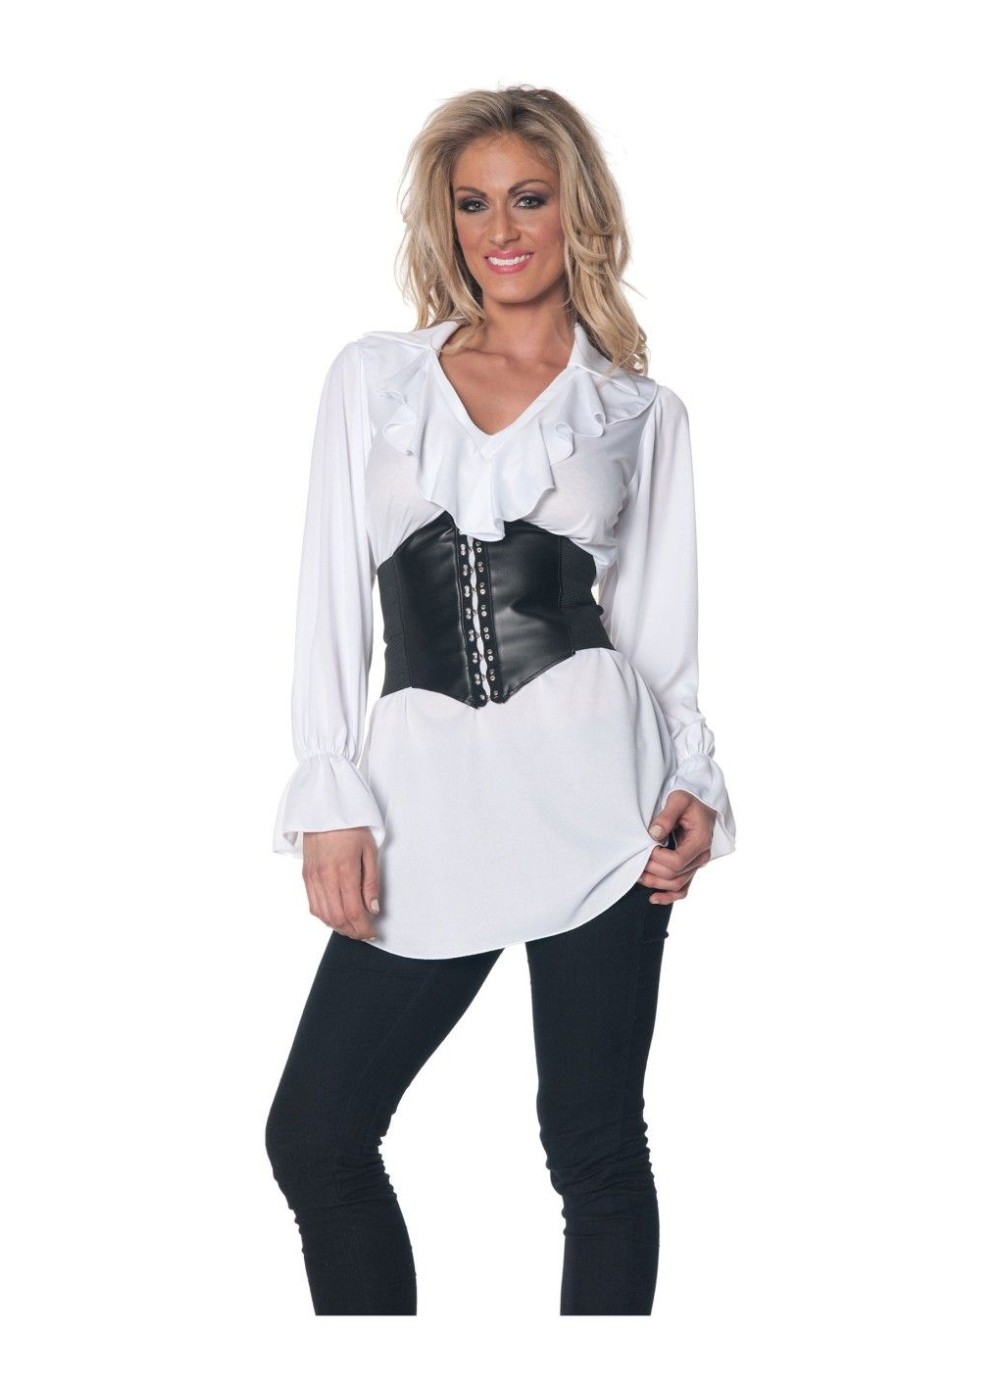 Pirate Woman Blouse And Waist Cincher Costume Kit